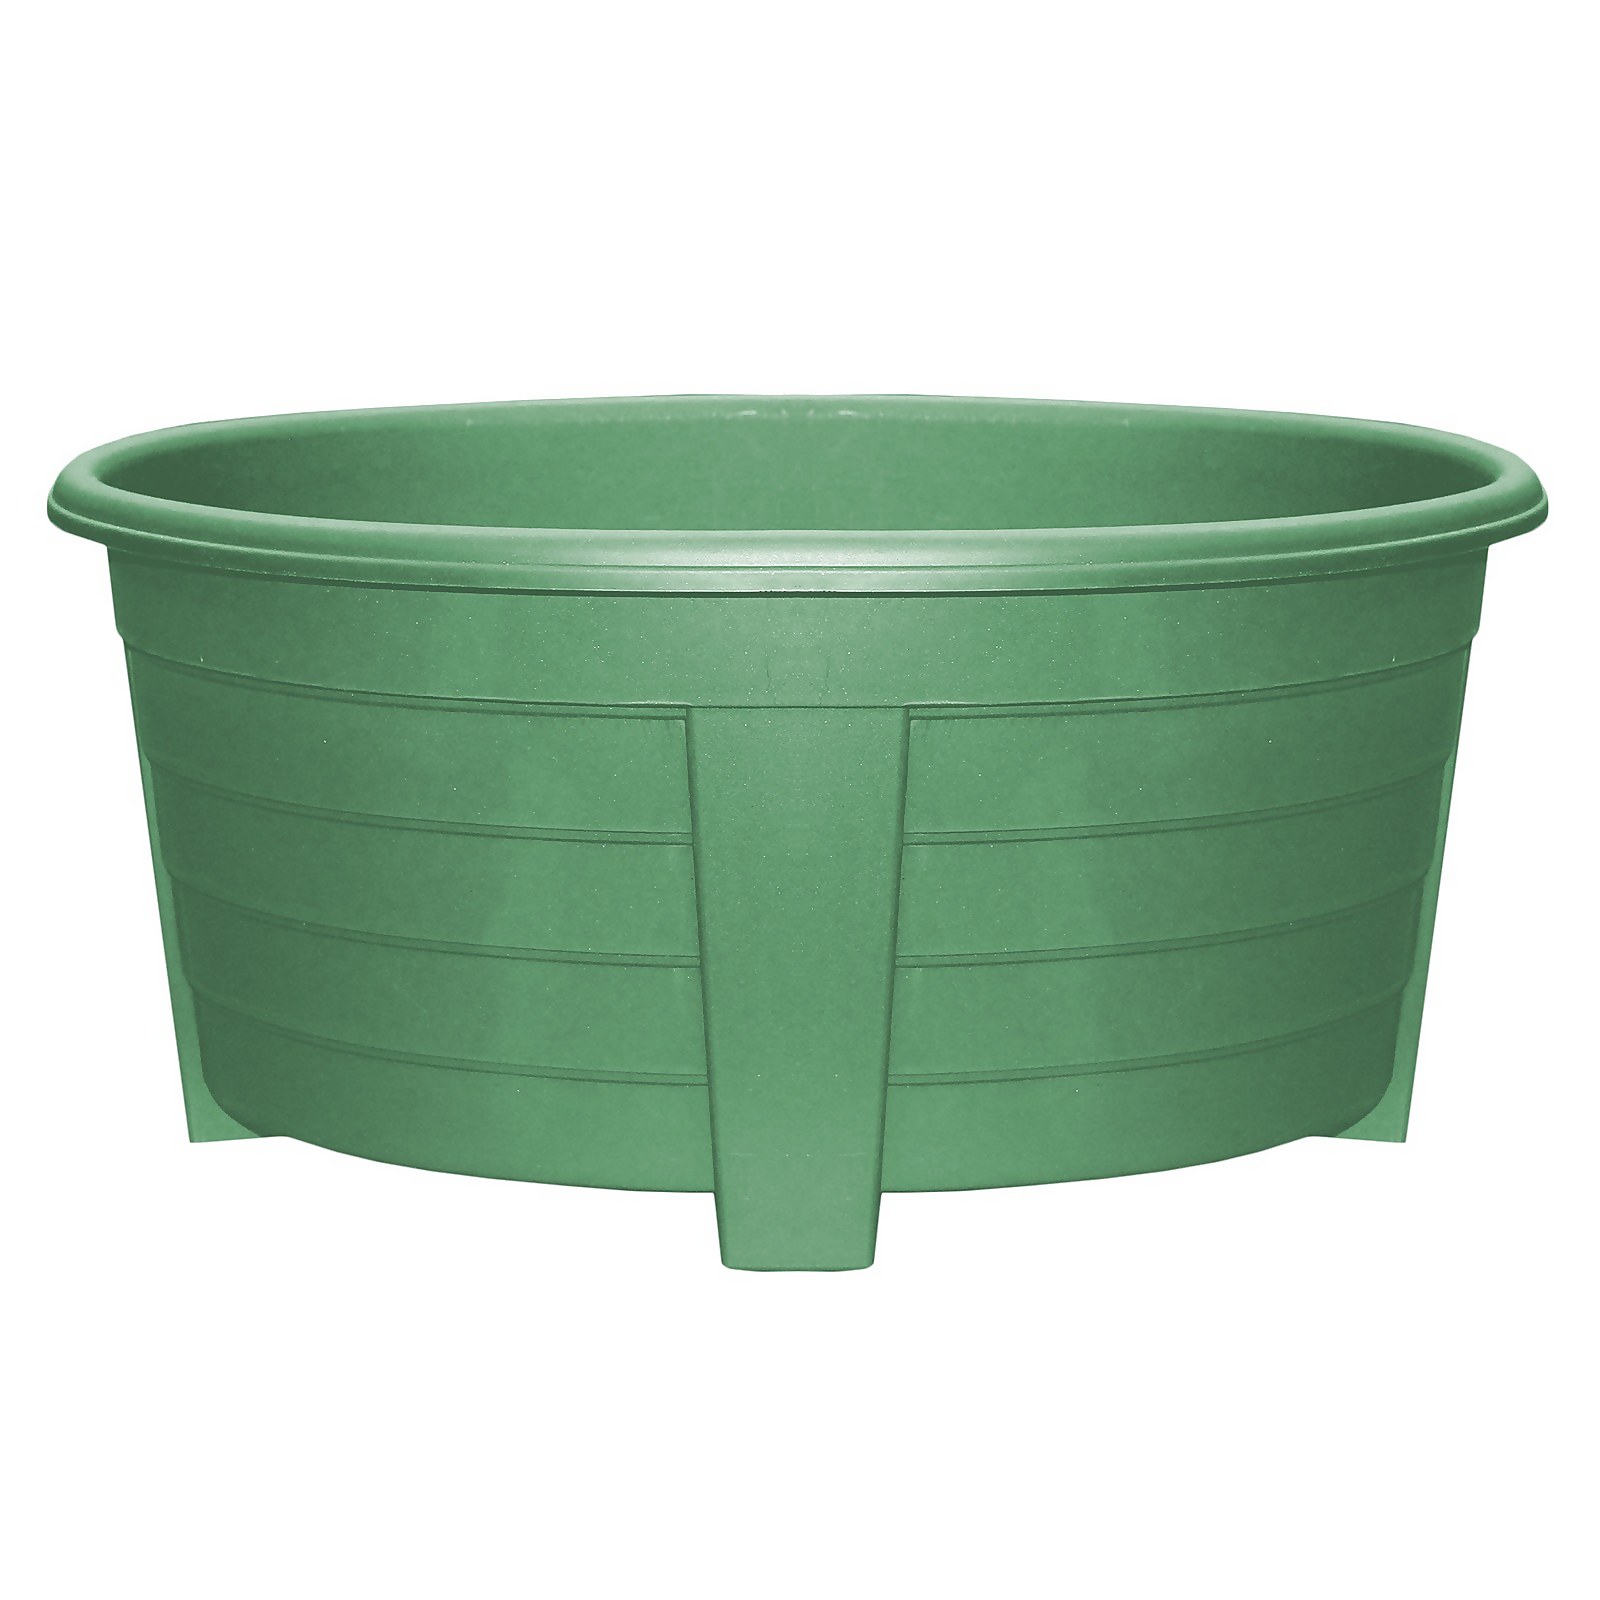 Photo of Green Oval Planter - 55cm